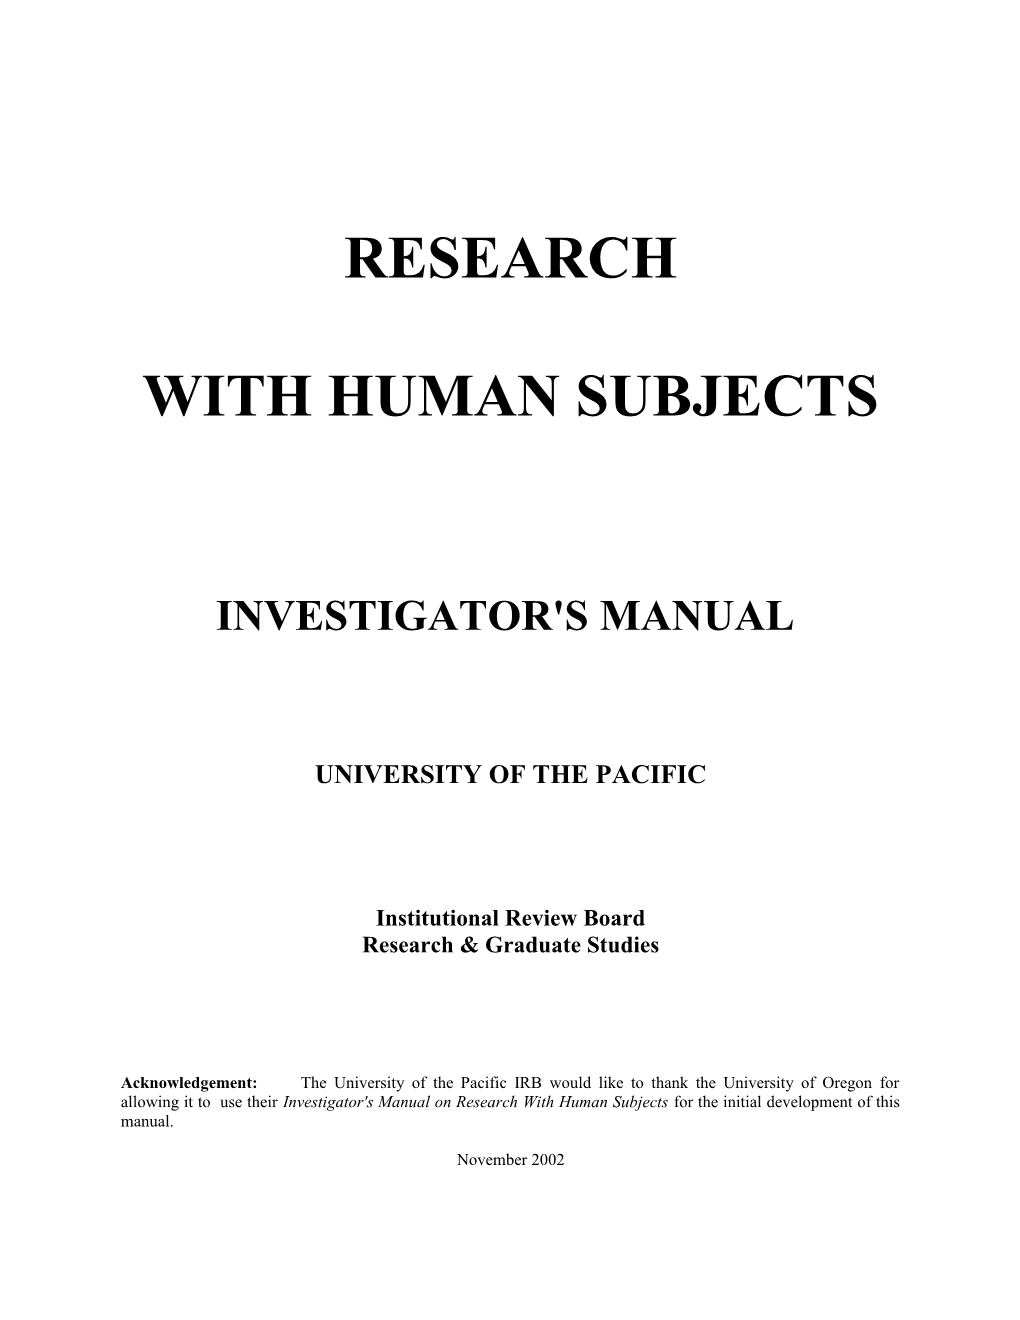 Investigator's Manual on Research